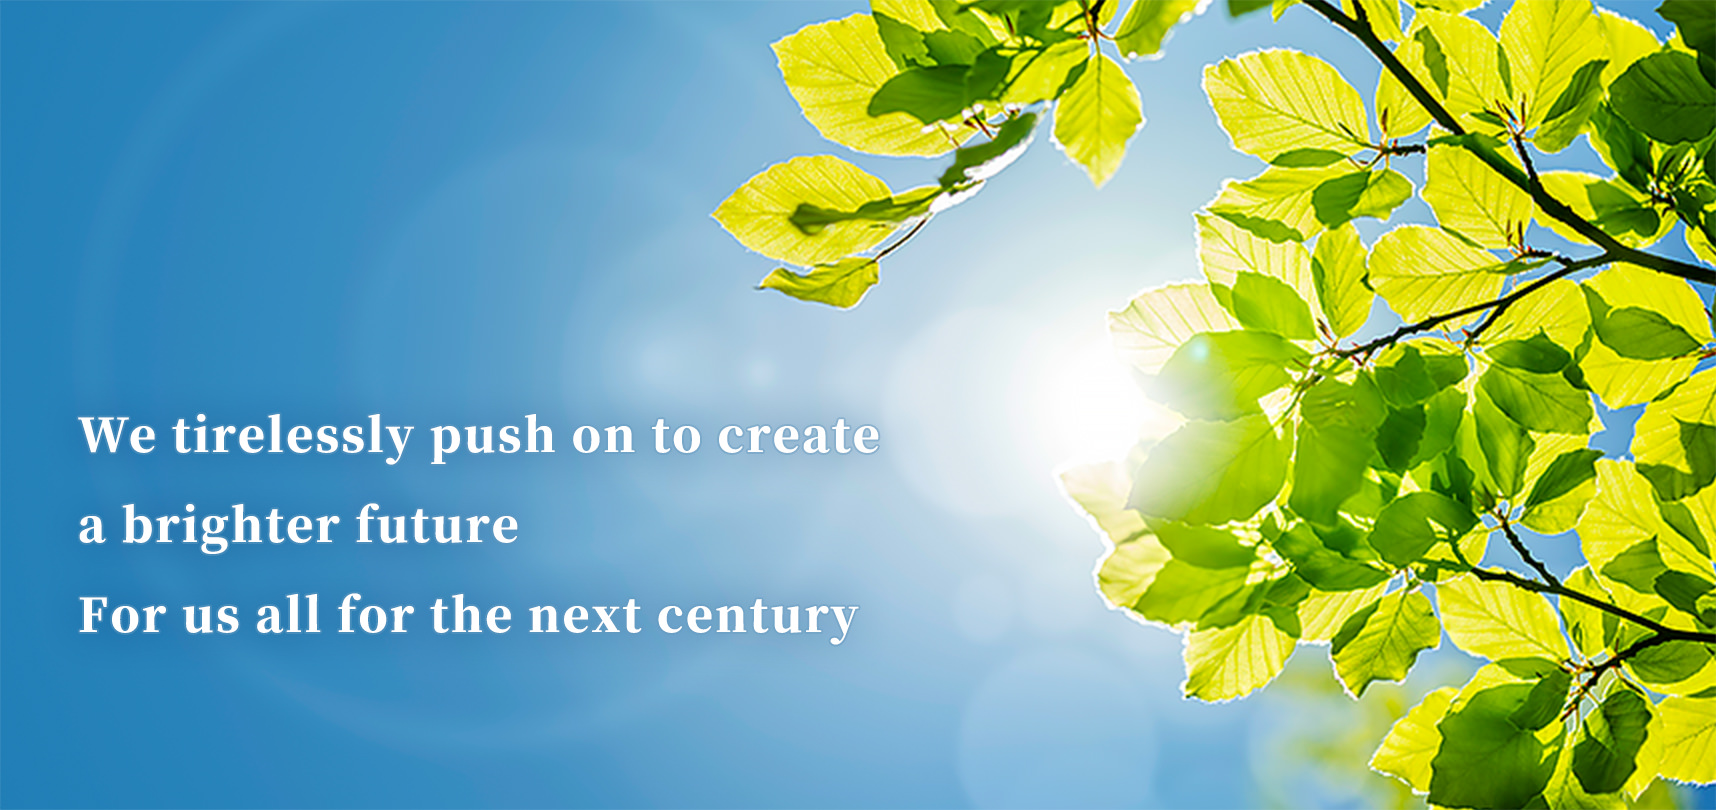 We tirelessly push on to create a brighter future. For us all for the next century.